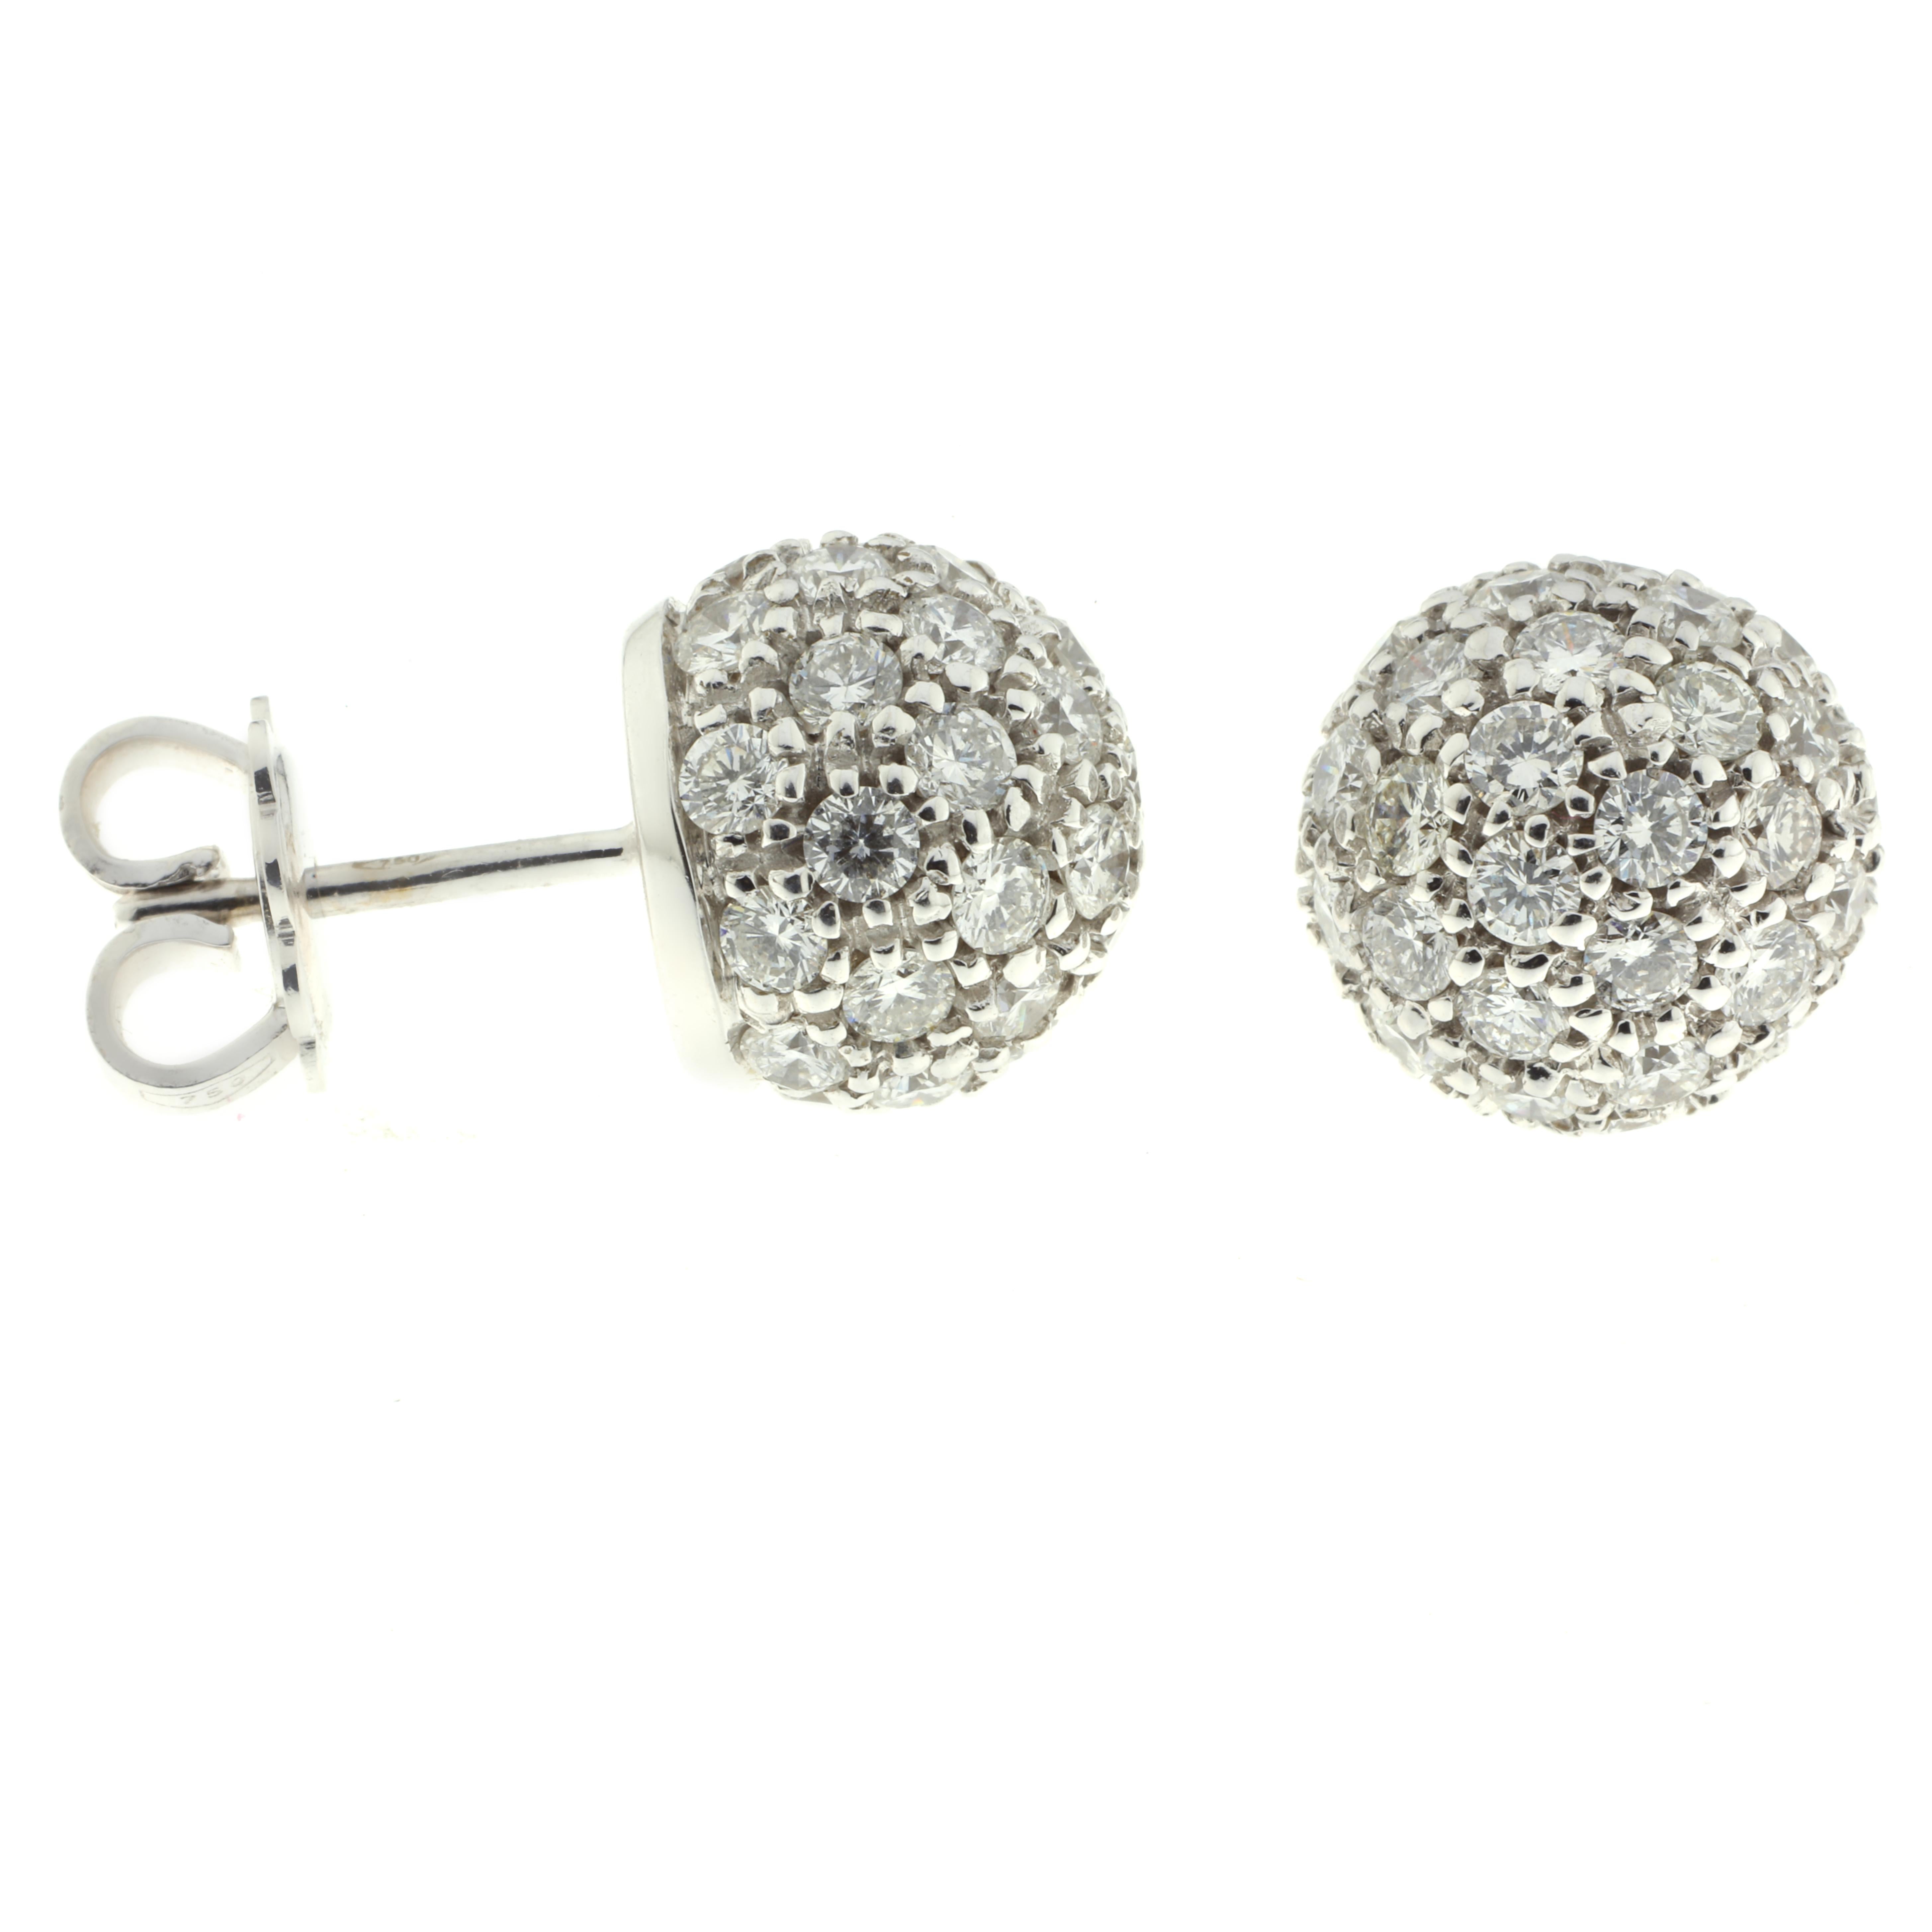 These earrings are a stunning 2.58 carats of white diamonds and 18-karat white gold. They have been masterfully handmade into a beautiful dome that is certain to catch and reflect light from any angle, drawing attention to the wearer with their